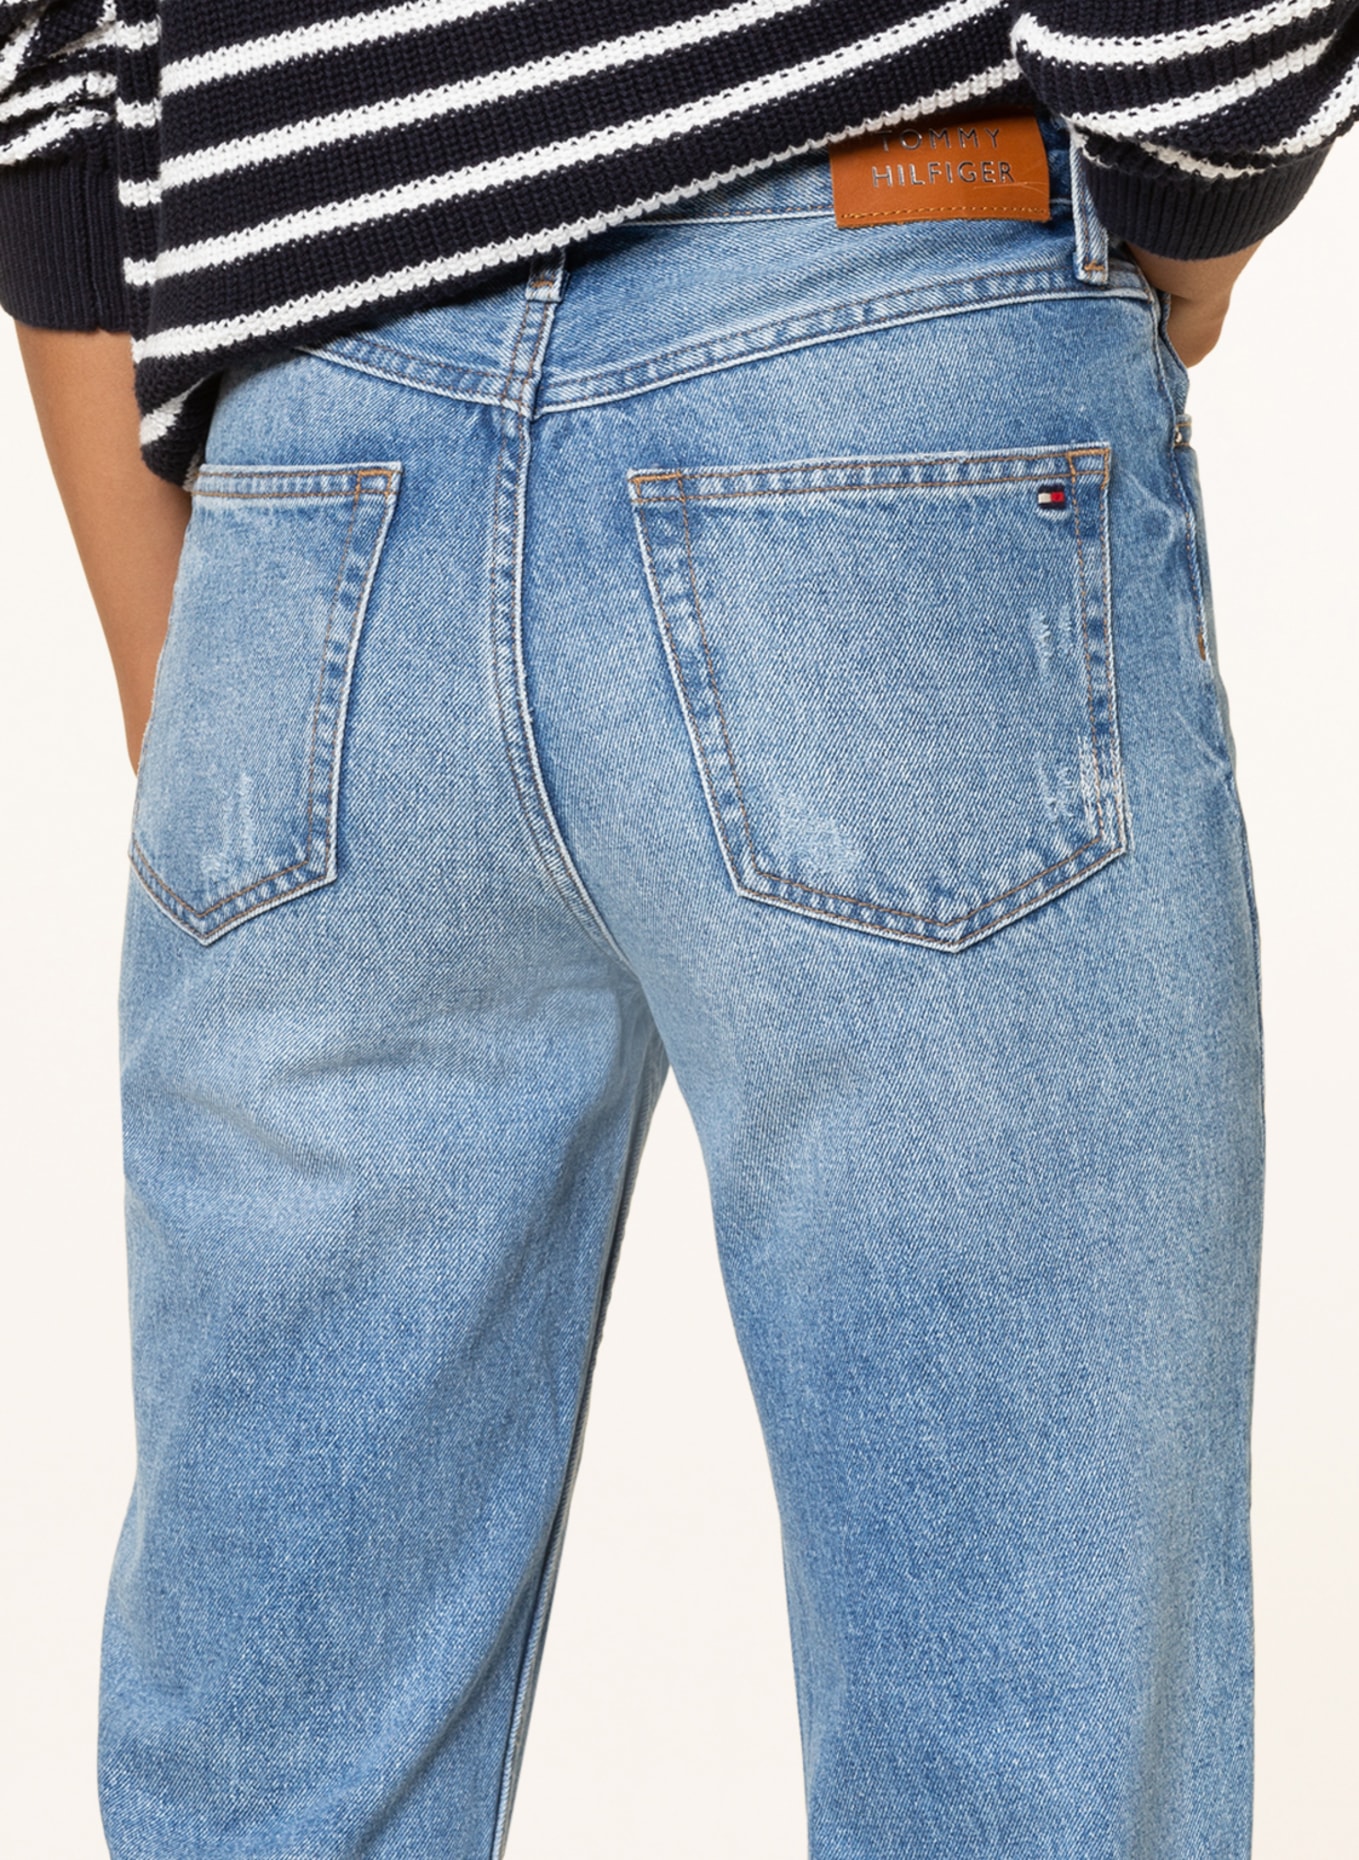 TOMMY HILFIGER Straight Jeans , Farbe: 1A4 Babe (Bild 5)